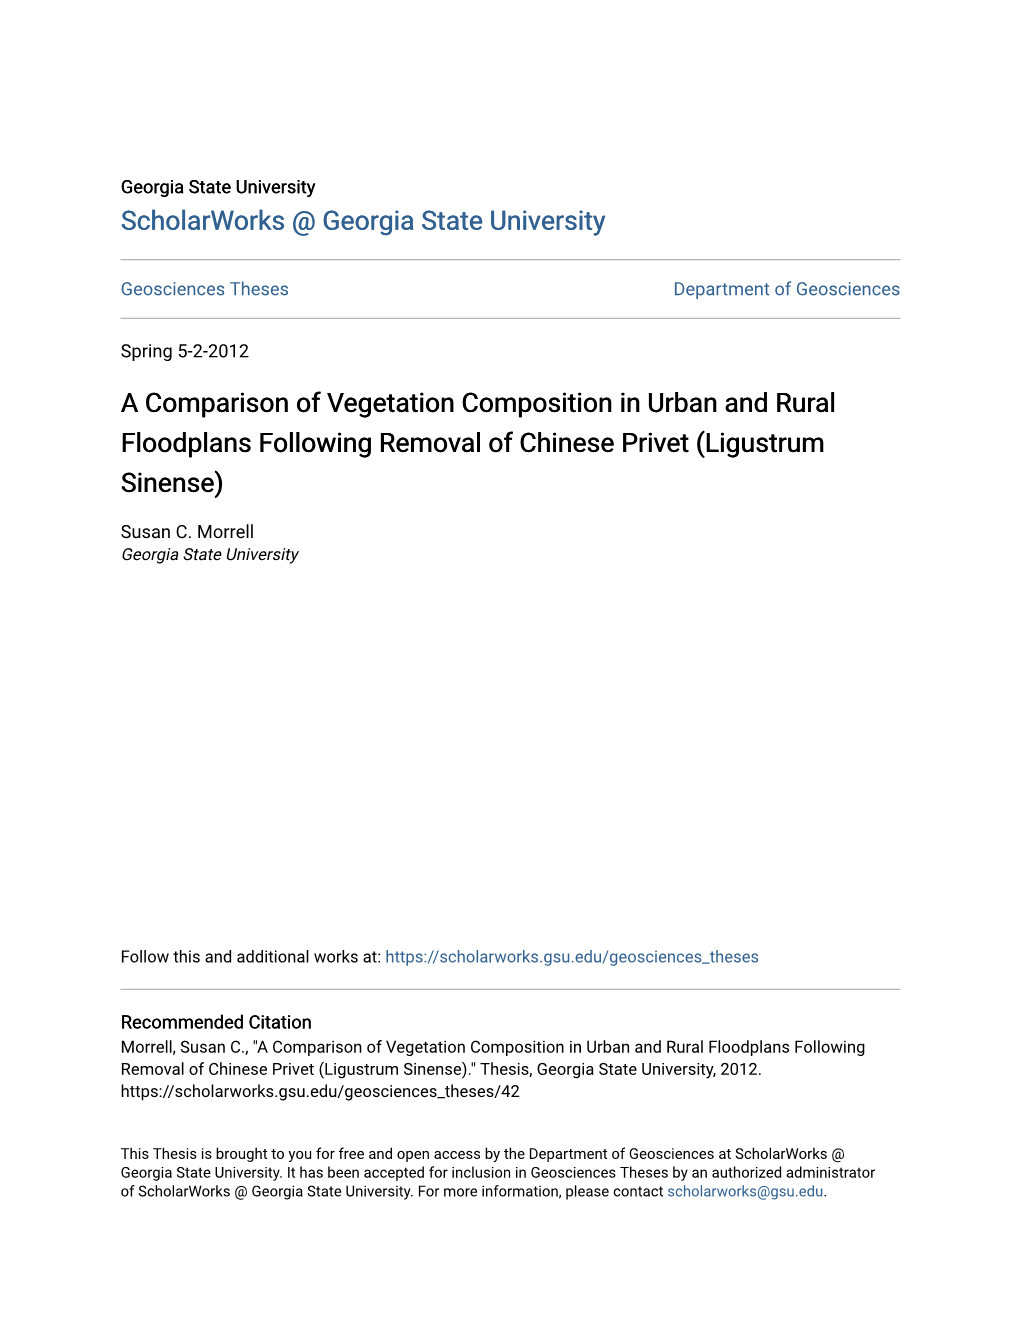 A Comparison of Vegetation Composition in Urban and Rural Floodplans Following Removal of Chinese Privet (Ligustrum Sinense)